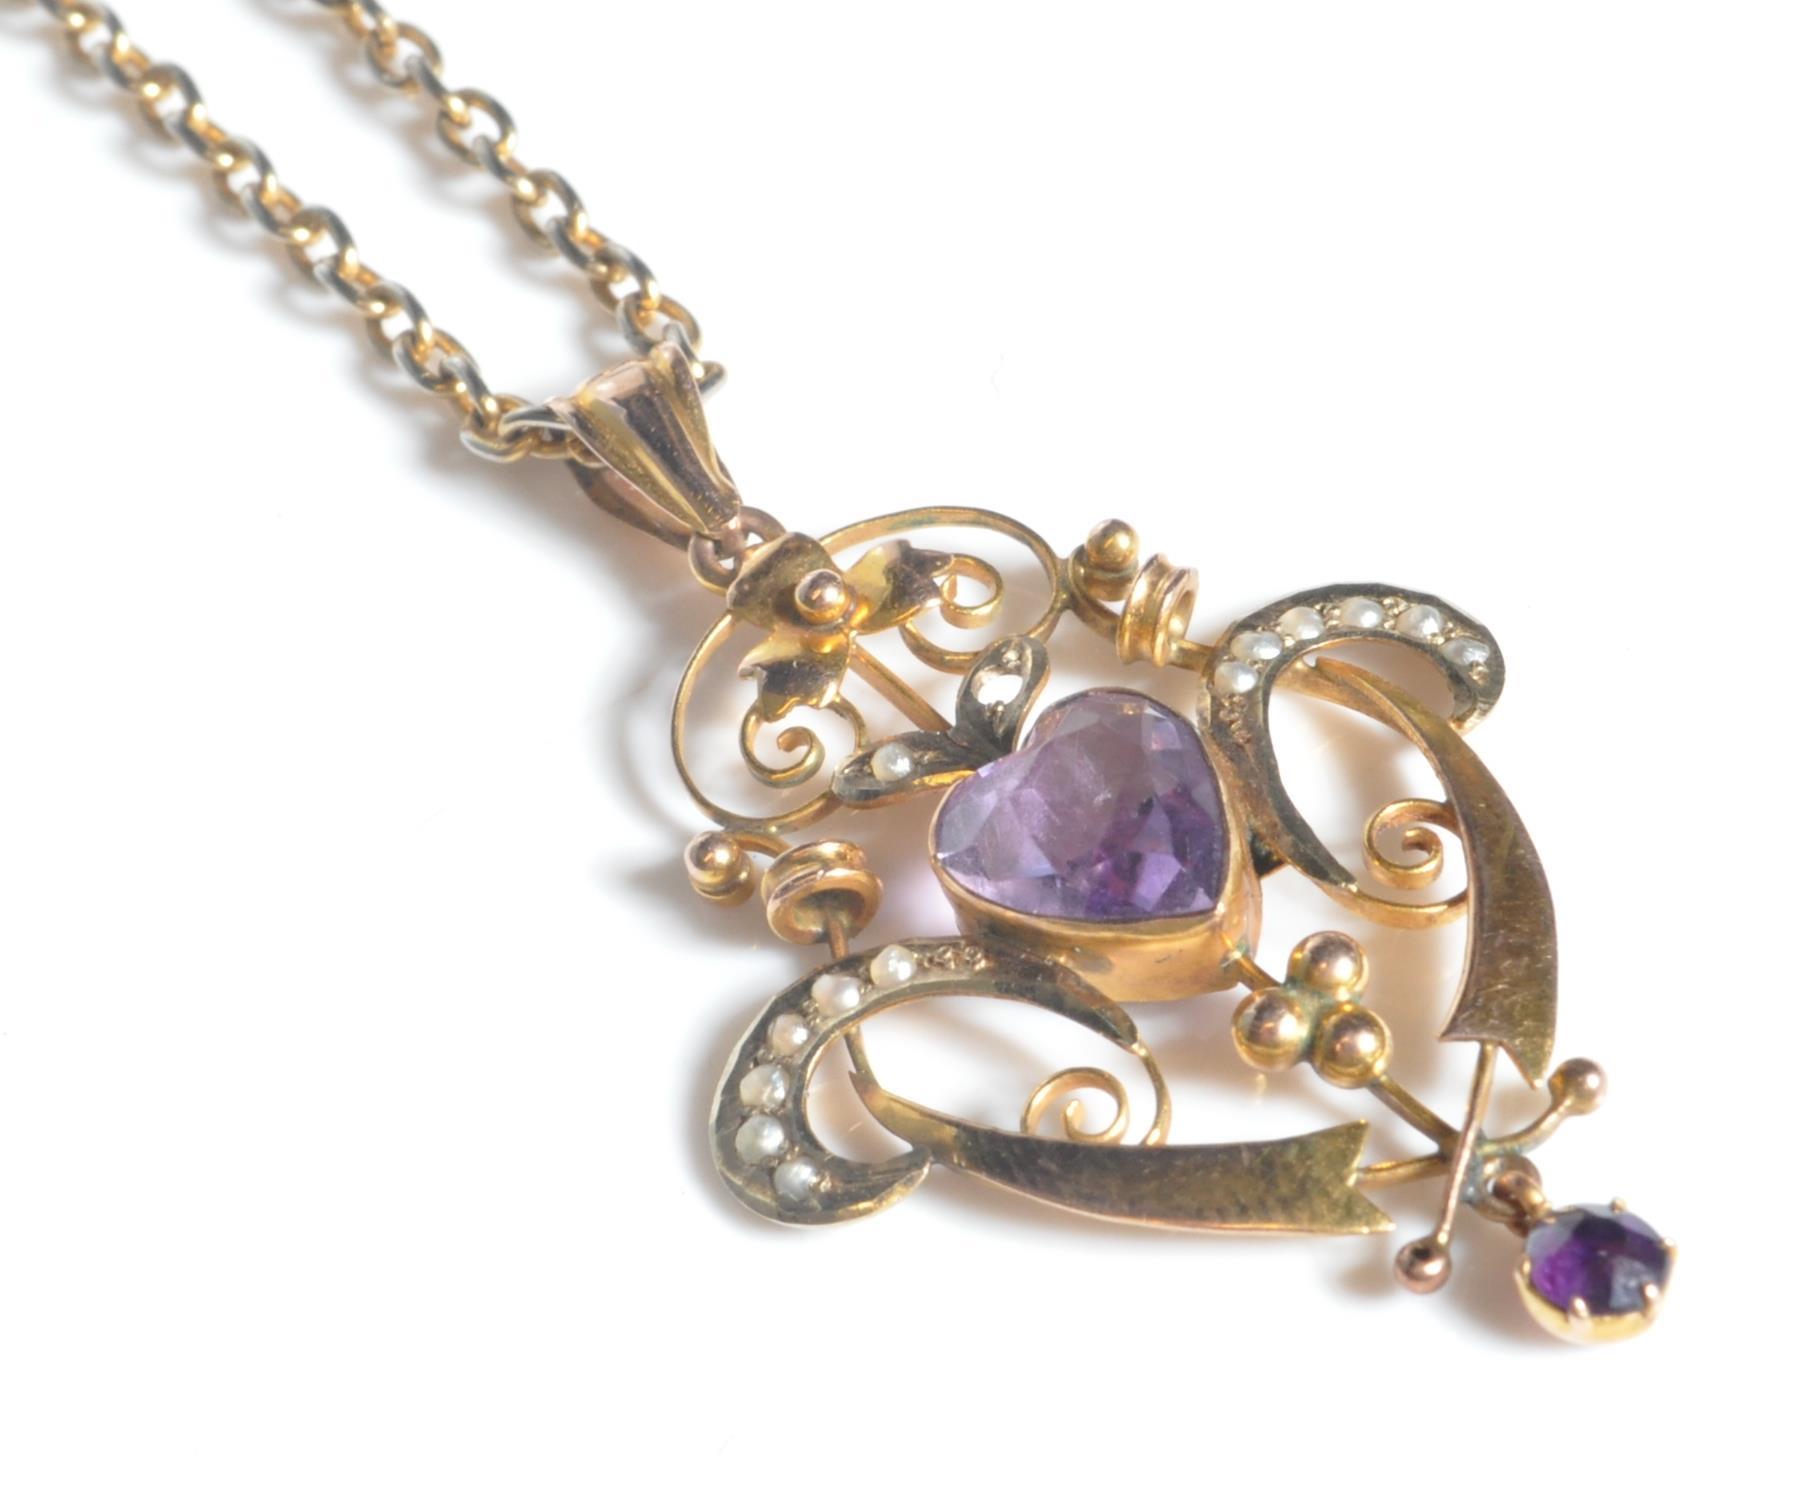 ANTIQUE GOLD PEARL AND AMETHYST PENDANT - Image 2 of 7